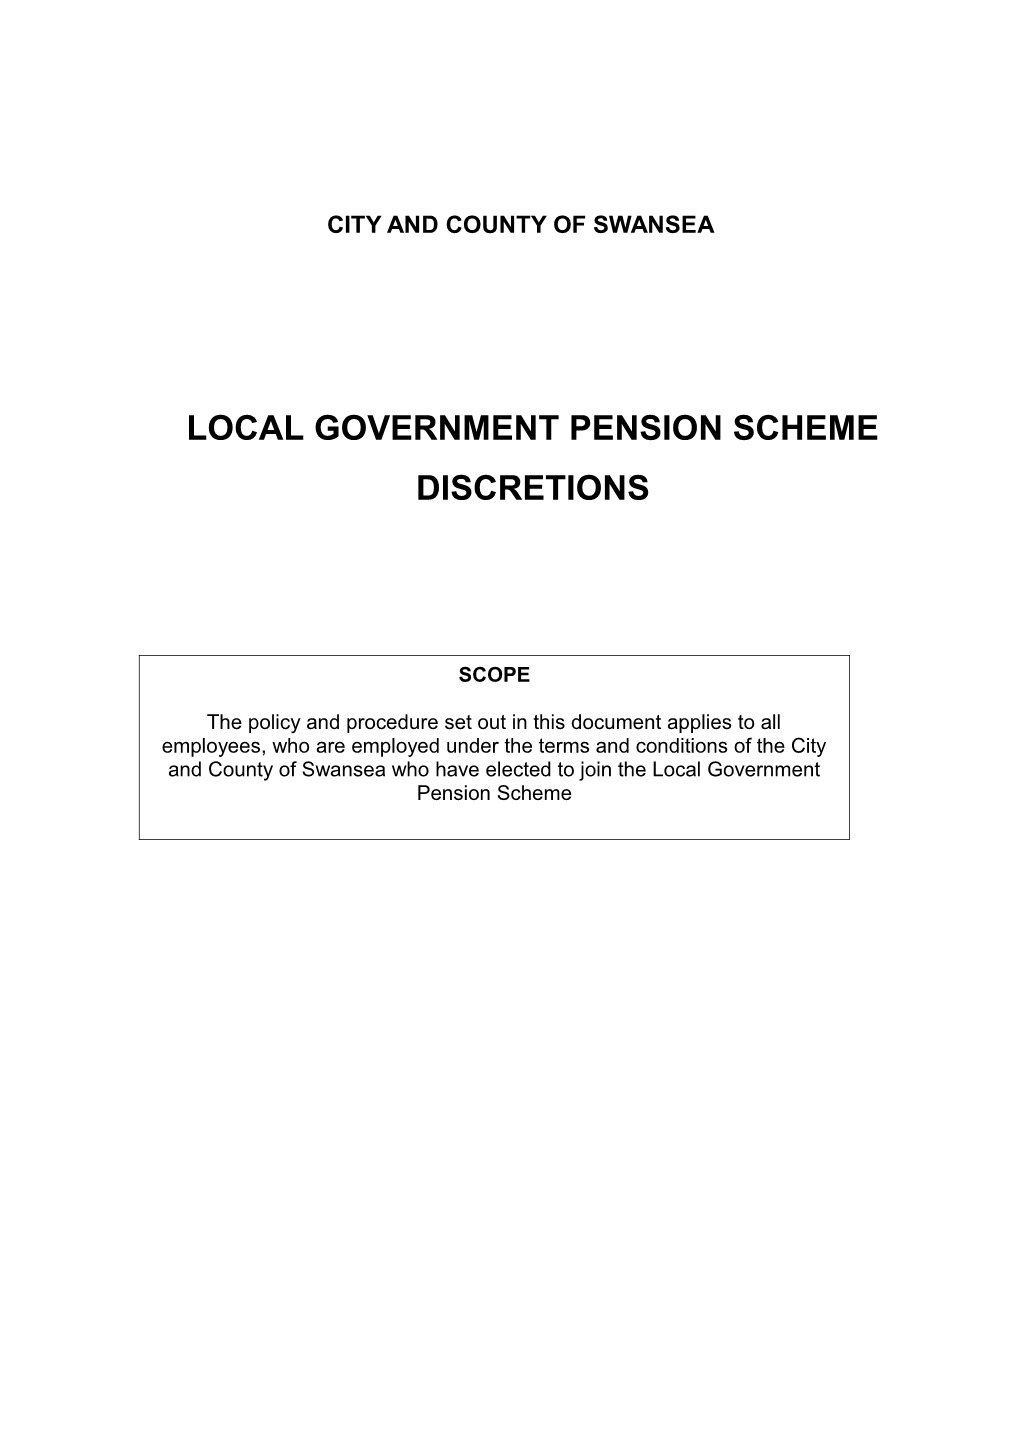 Policy Statement on Discretions Exercised by Bcbc in the Local Government Pension Scheme